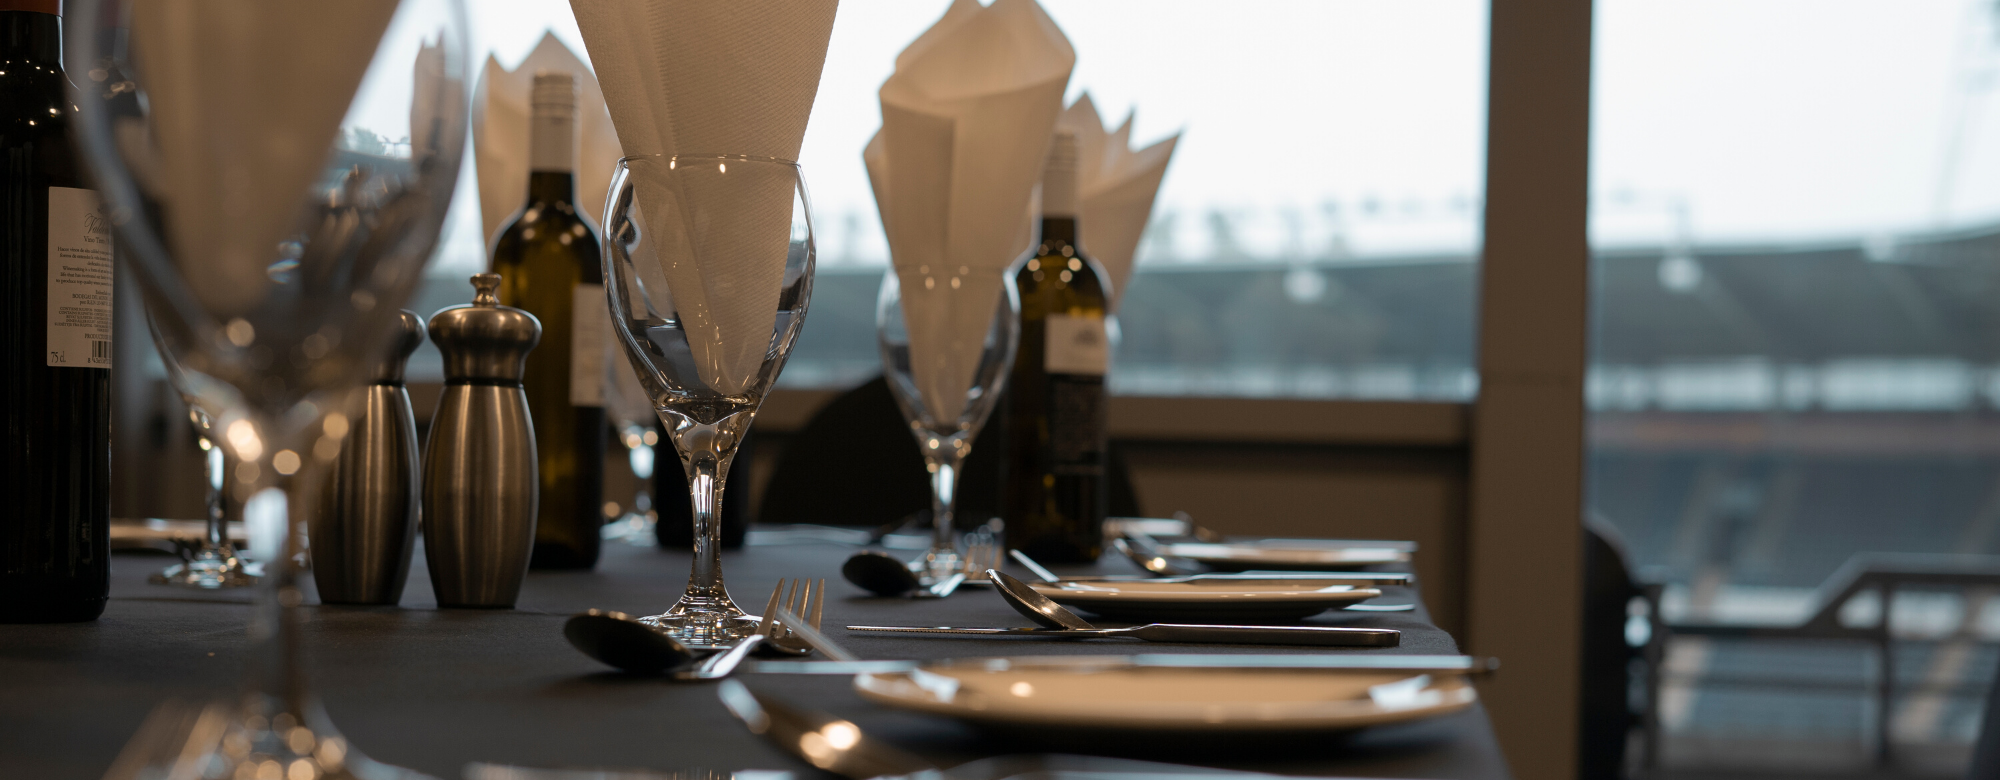 Celebrate Special Occasion With Executive Box At MKM Stadium!